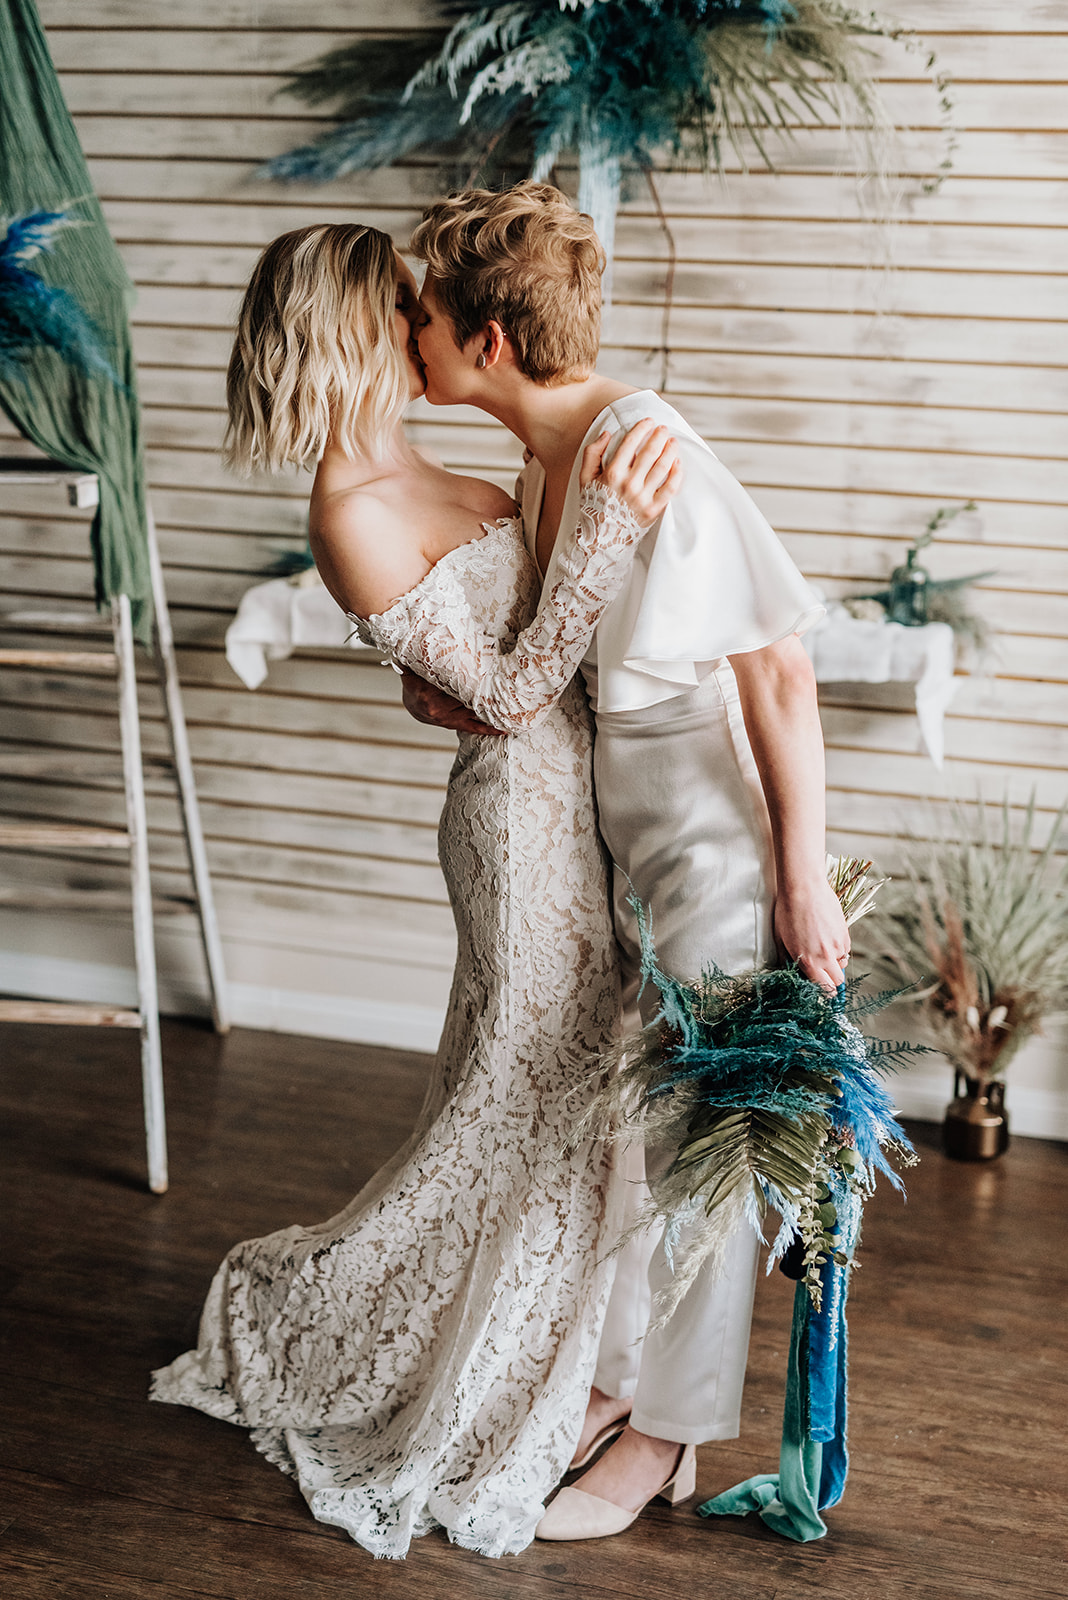 Brides share a kiss in front of their bohemian wedding decor featuring a palette of deep blue and dark teal accents